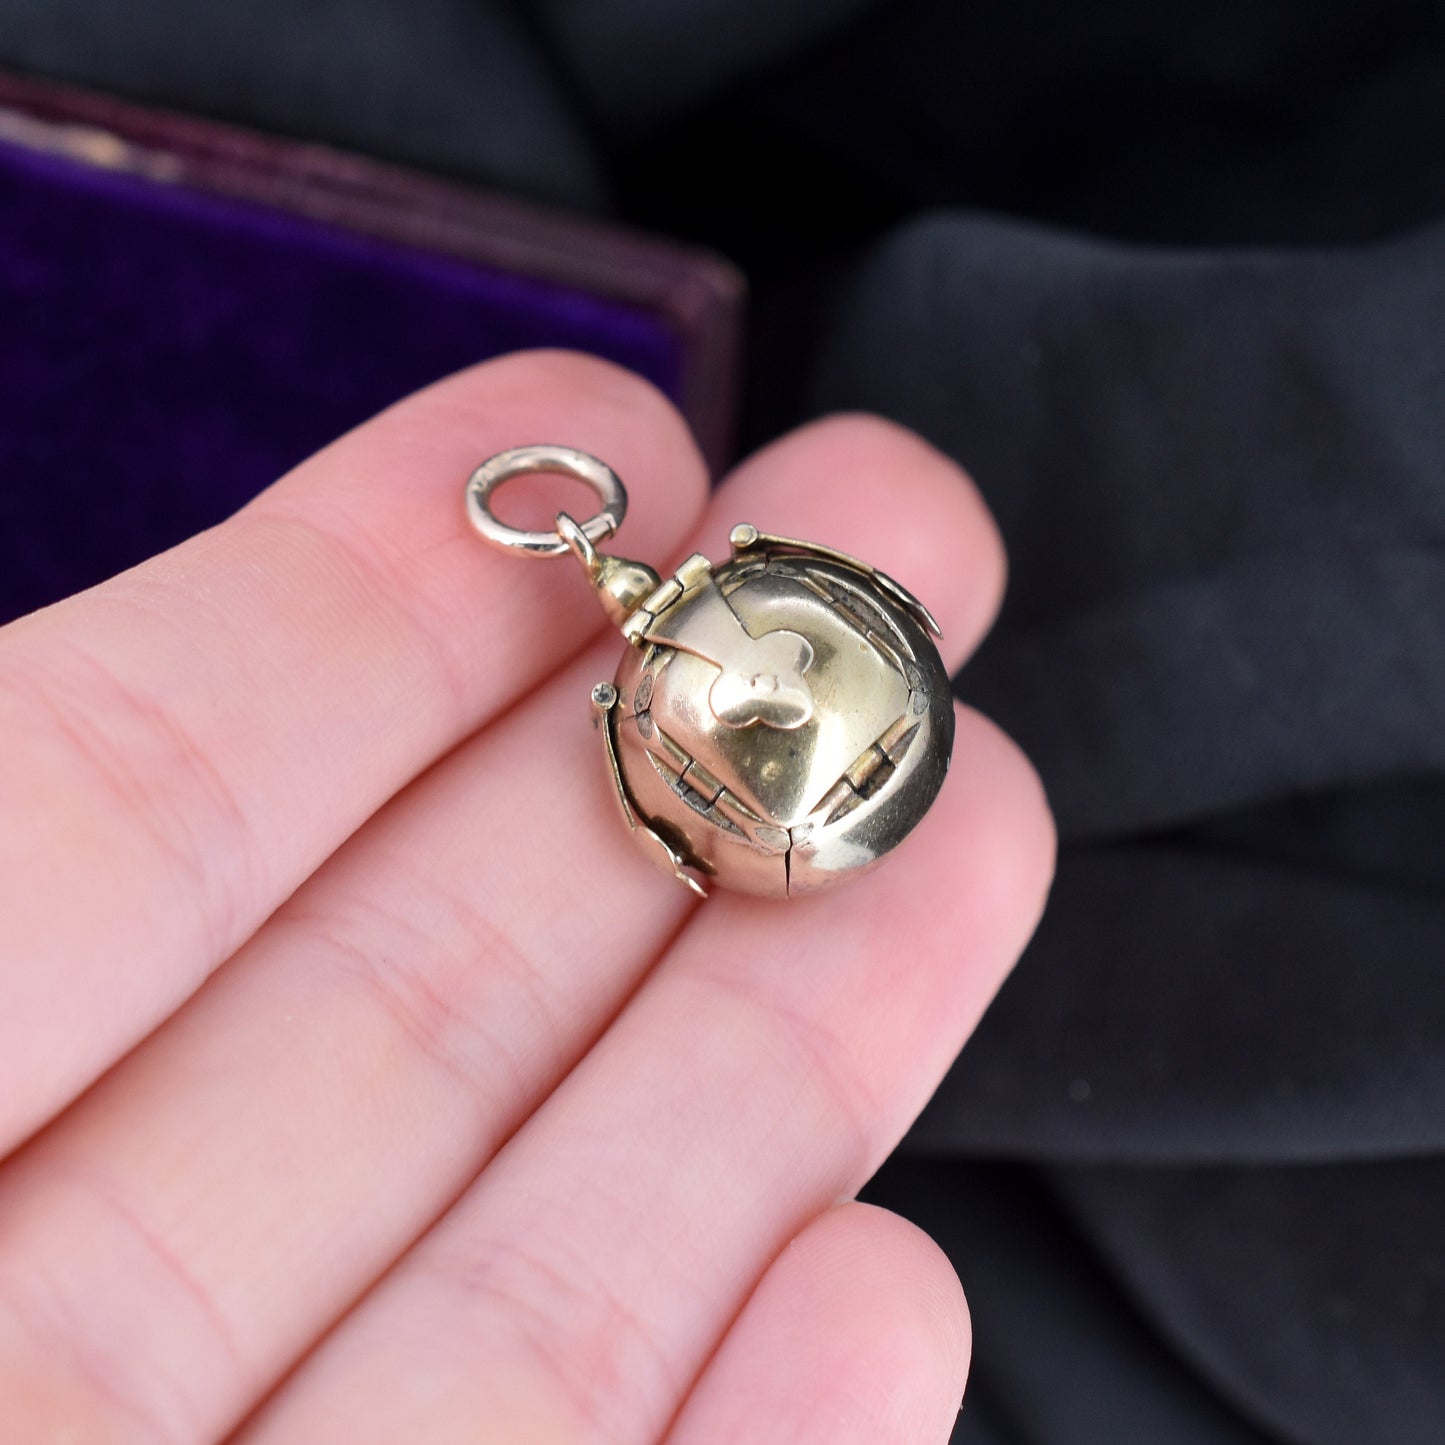 Vintage 9ct Gold and Silver Masonic Ball Charm Pendant